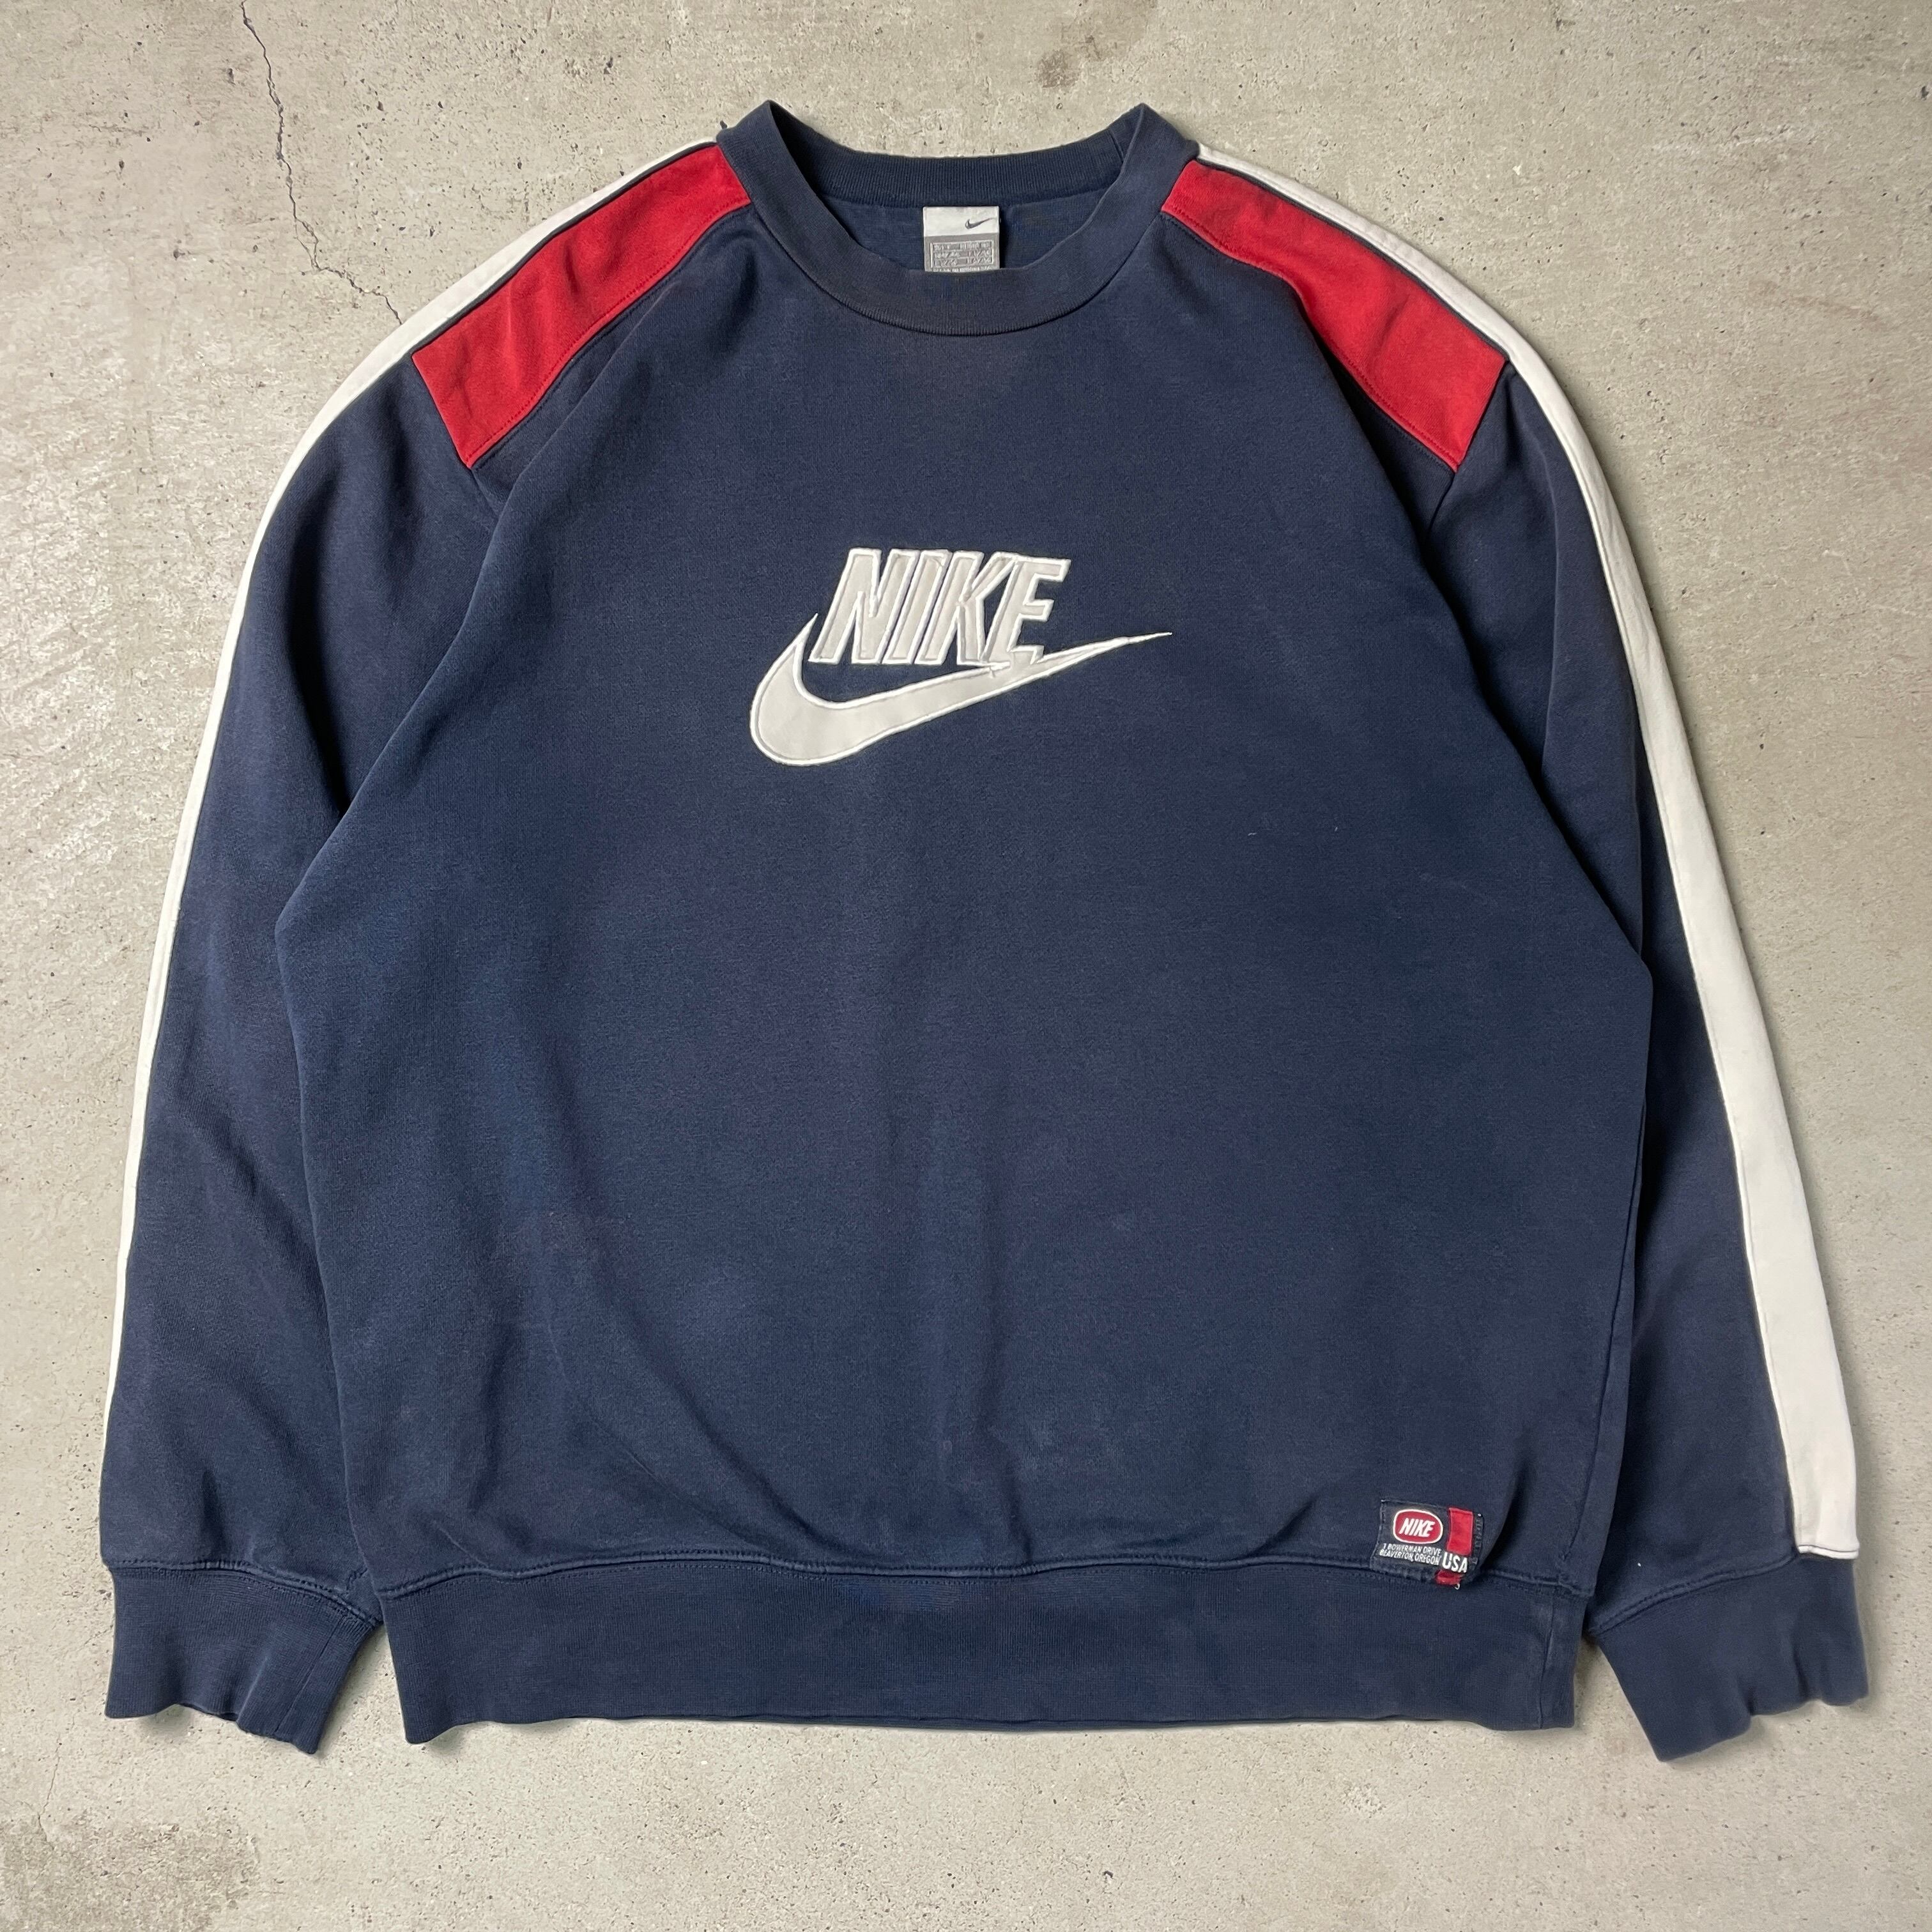 NIKE/ナイキ | cave 古着屋【公式】古着通販サイト